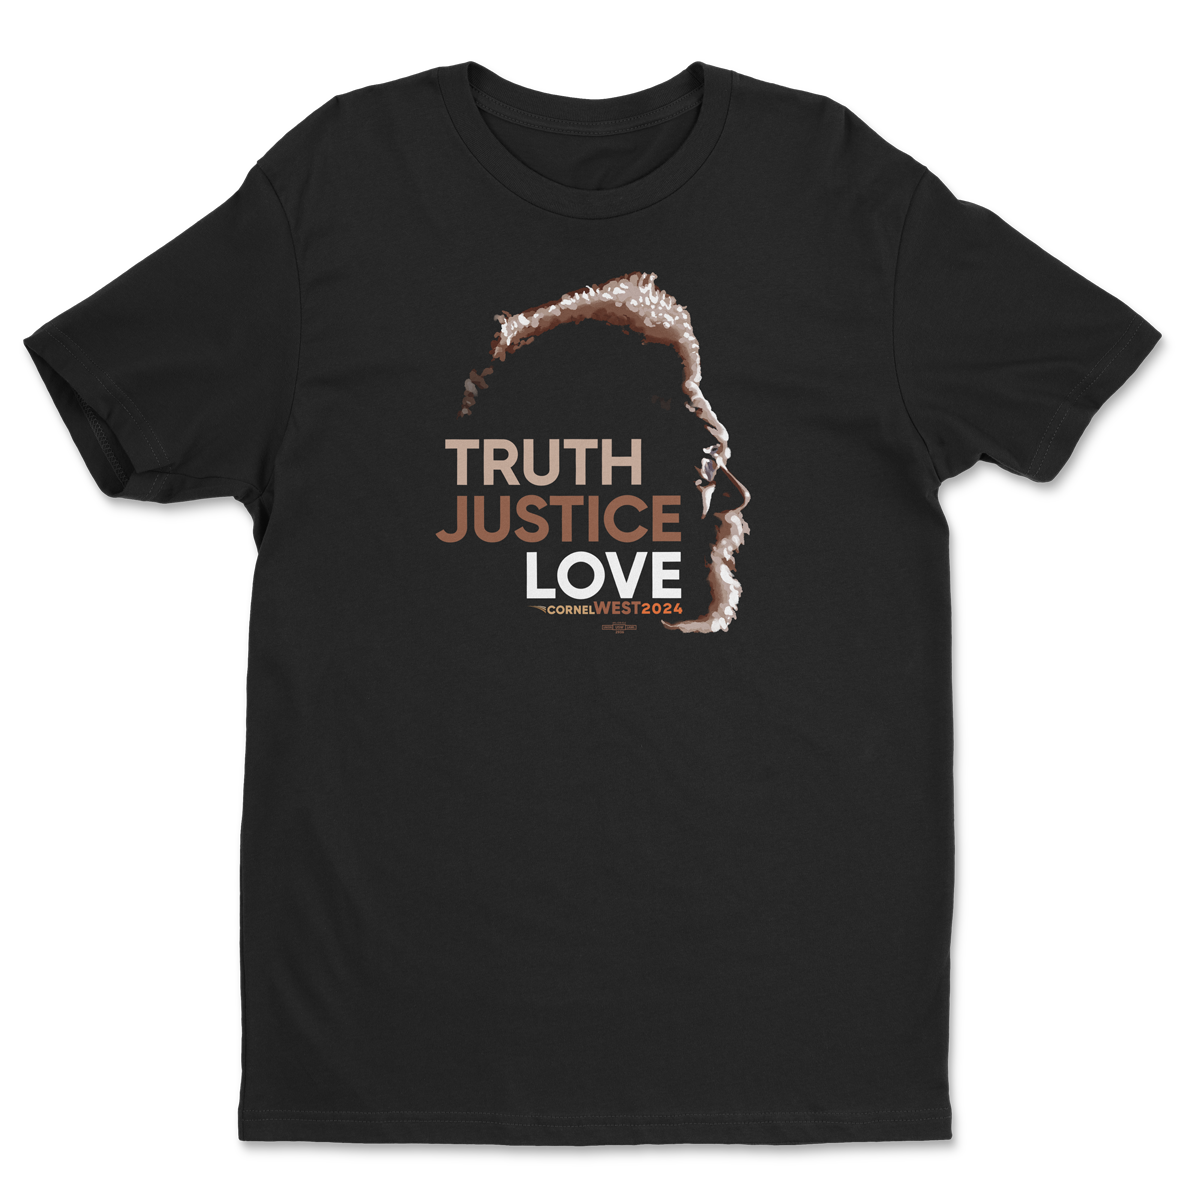 Truth Justice Love Tee